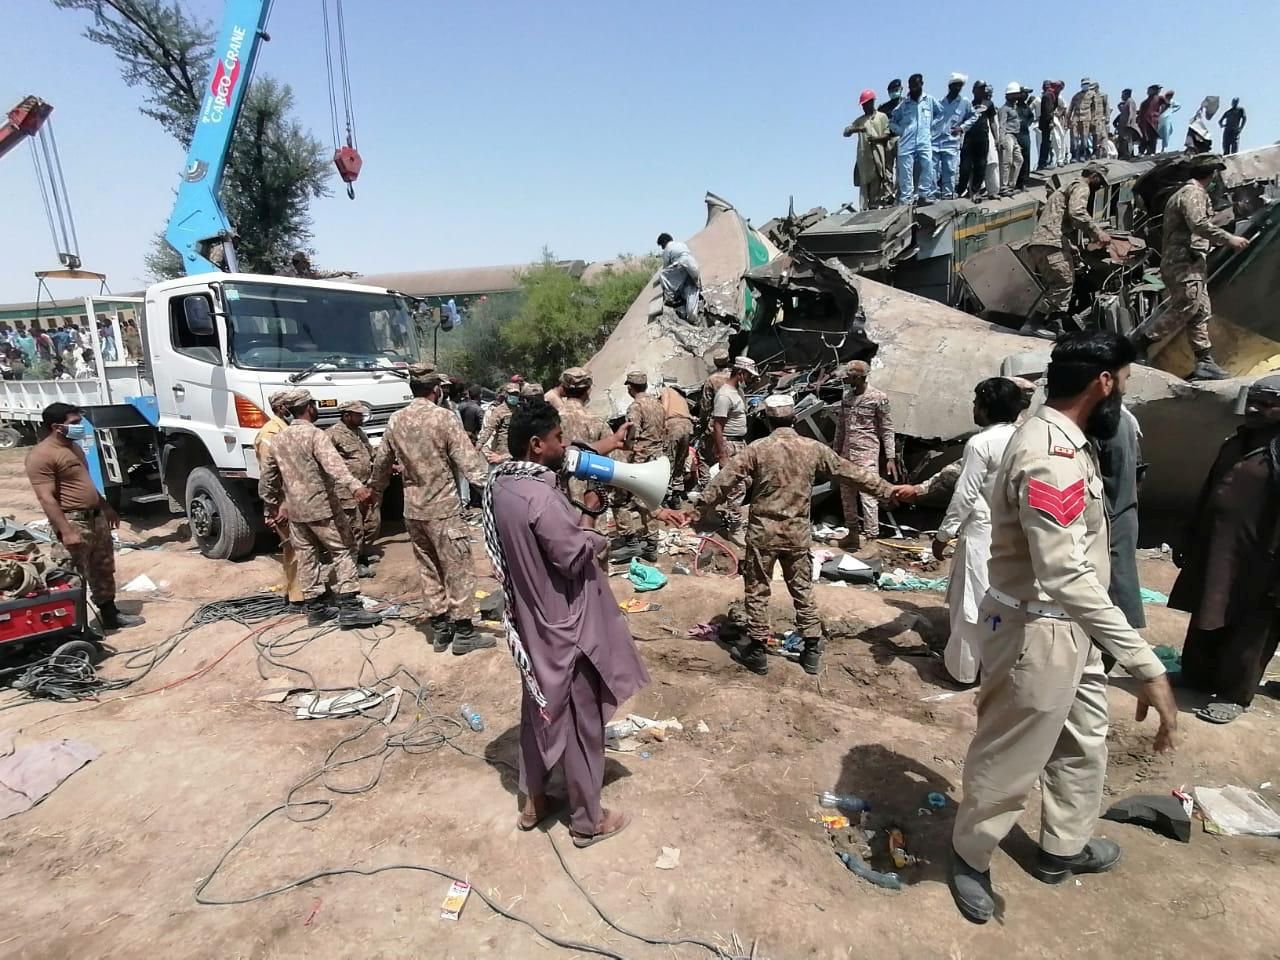 Paramilitary soldiers and rescue workers gather at the site following a collision between two trains in Ghotki, Pakistan June 7, 2021. Photo: Inter-Services Public Relations (ISPR)/ Handout via Reuters